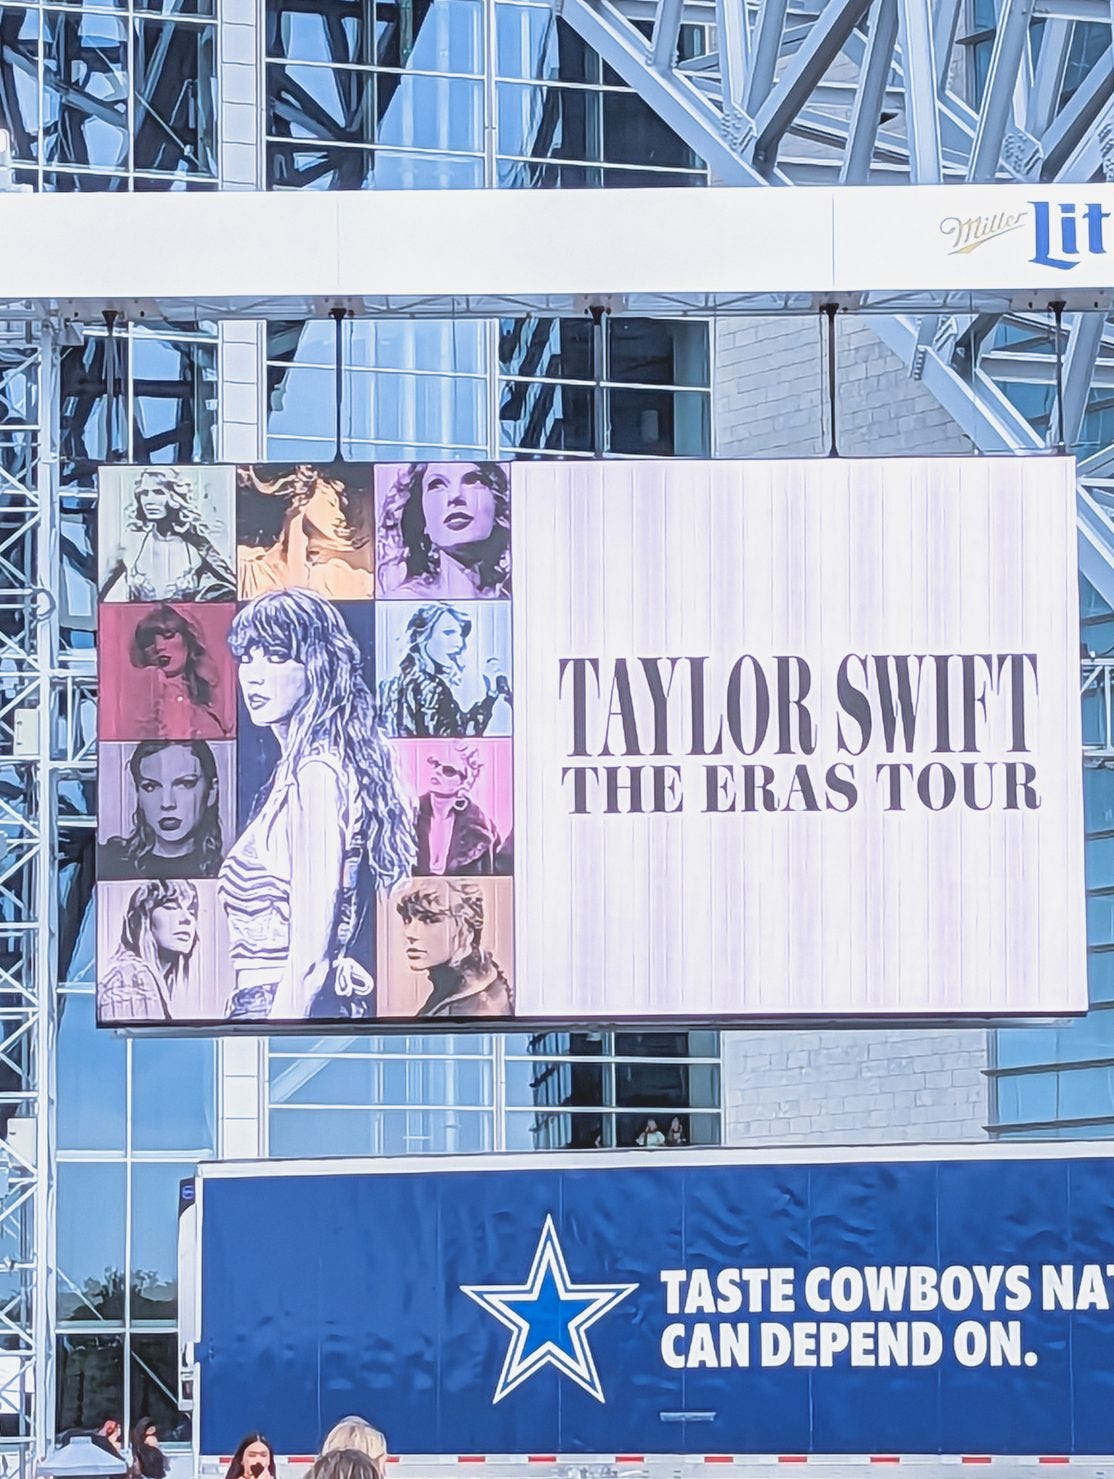 A sign promoting Taylor Swift’s The Eras Tour.